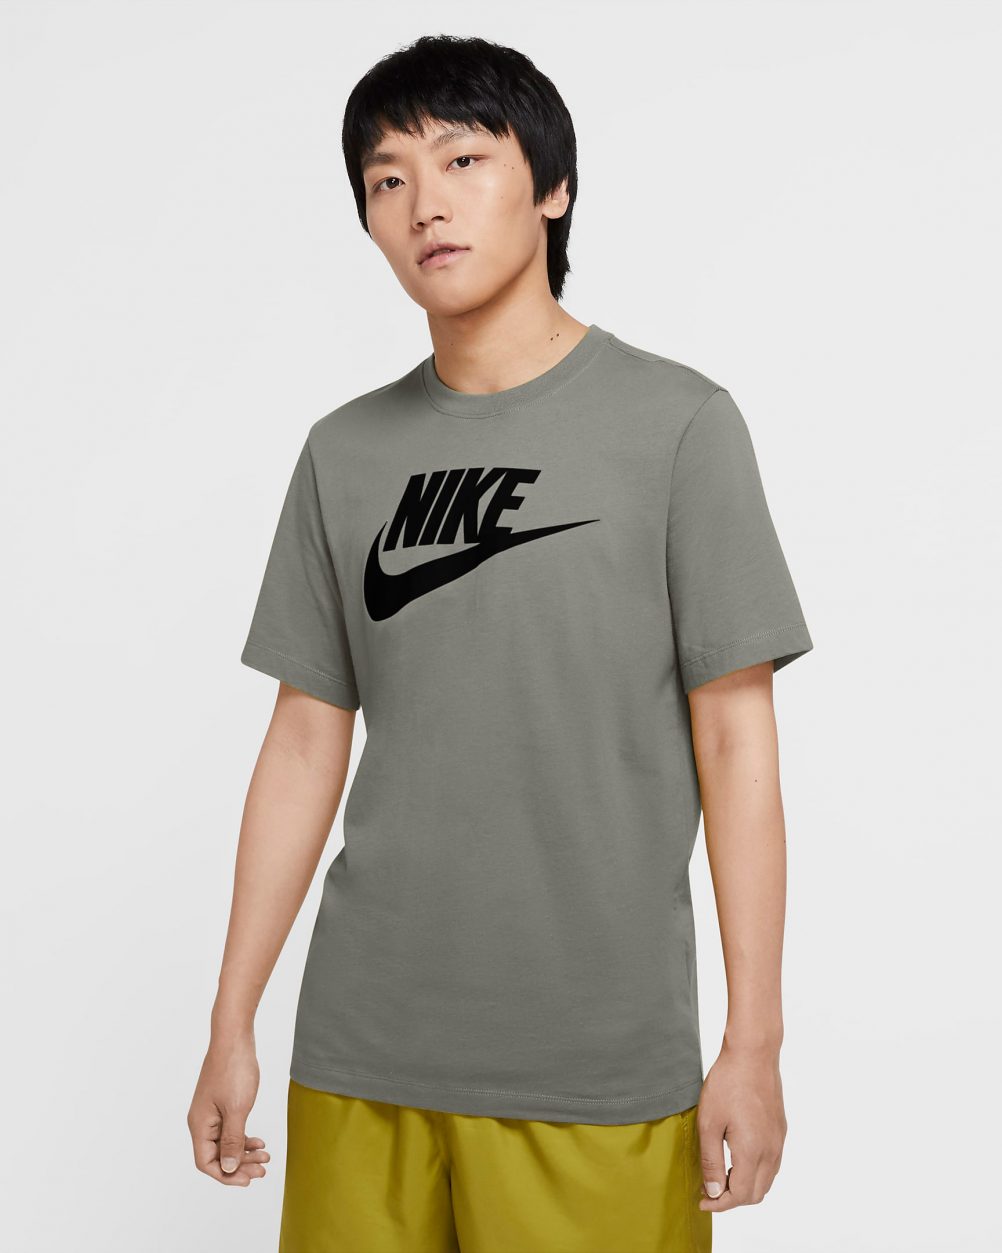 Nike Light Army Sneaker Clothing Shirts Outfits